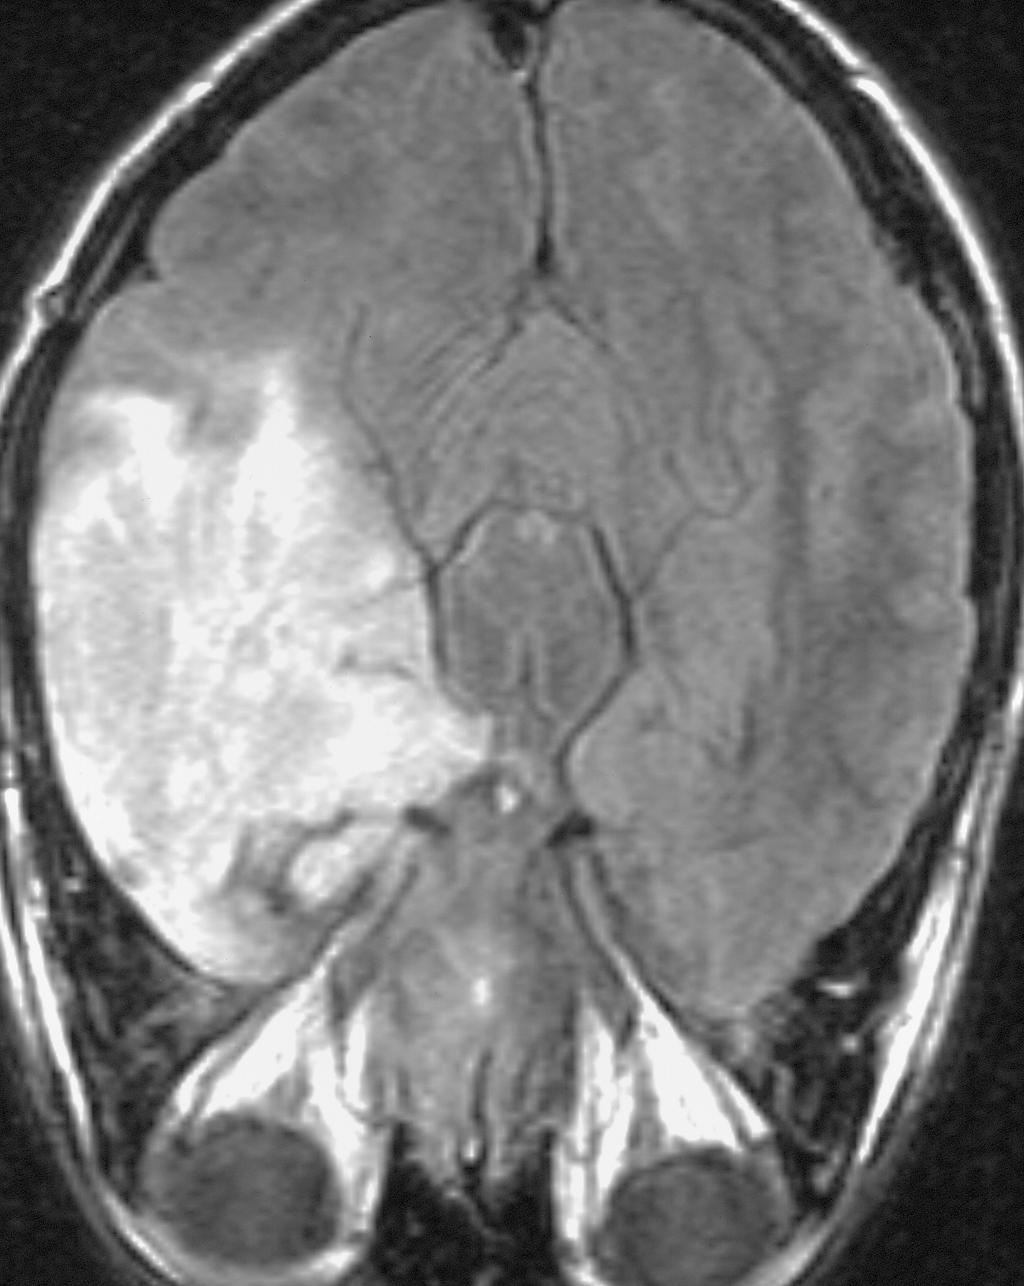 Figure 1(a). Axial images of a patient with a low grade glioma. (a) A T1 weighted image showing the tumour as a dark region relative to brain, due to its longer T1.